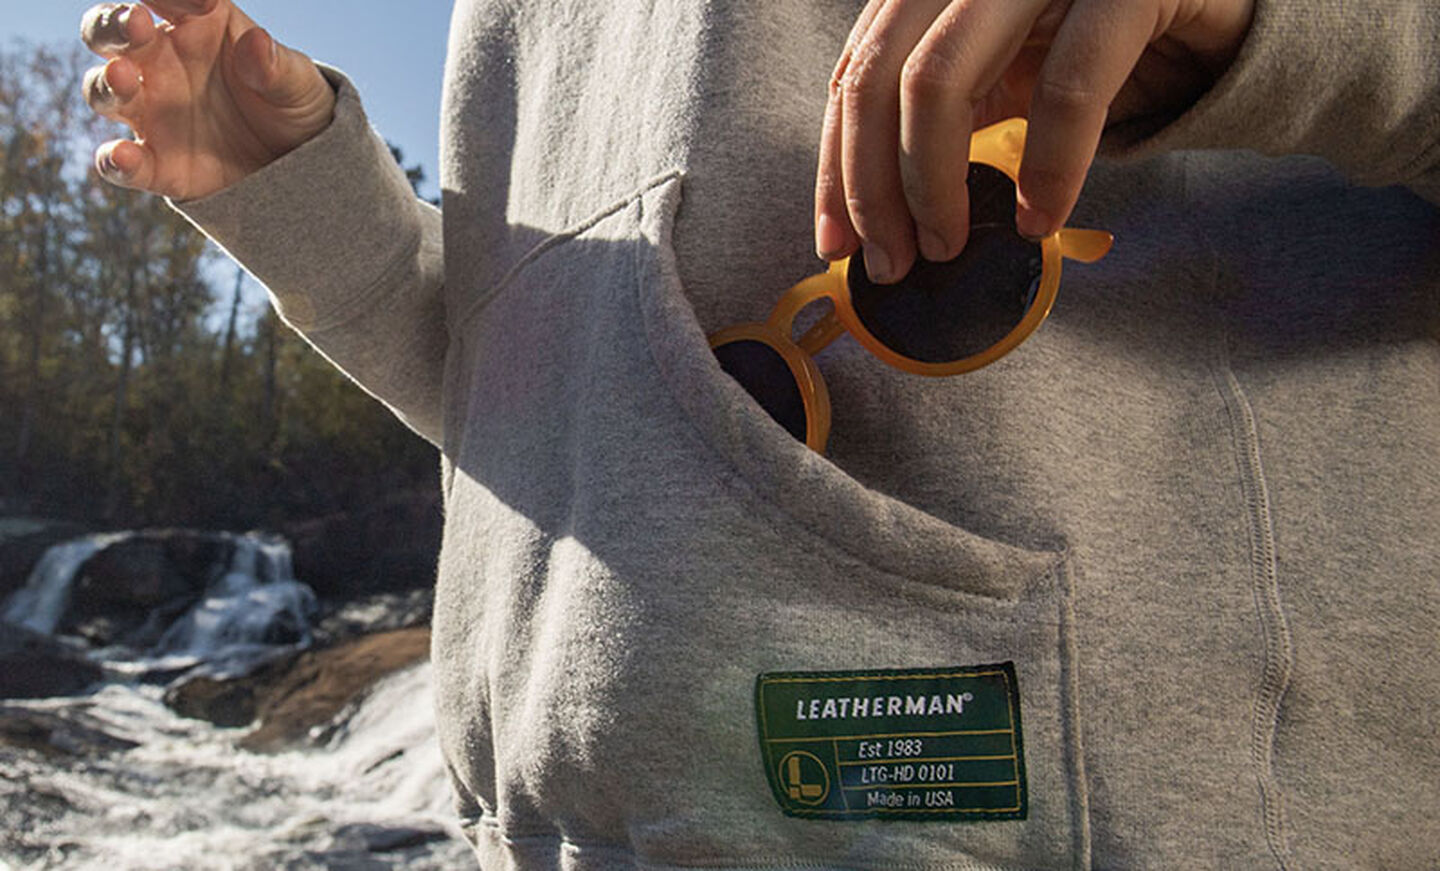 Sashing sunglasses in the front pouch of the Leatherman Basics Pullover Hoodie in gray.